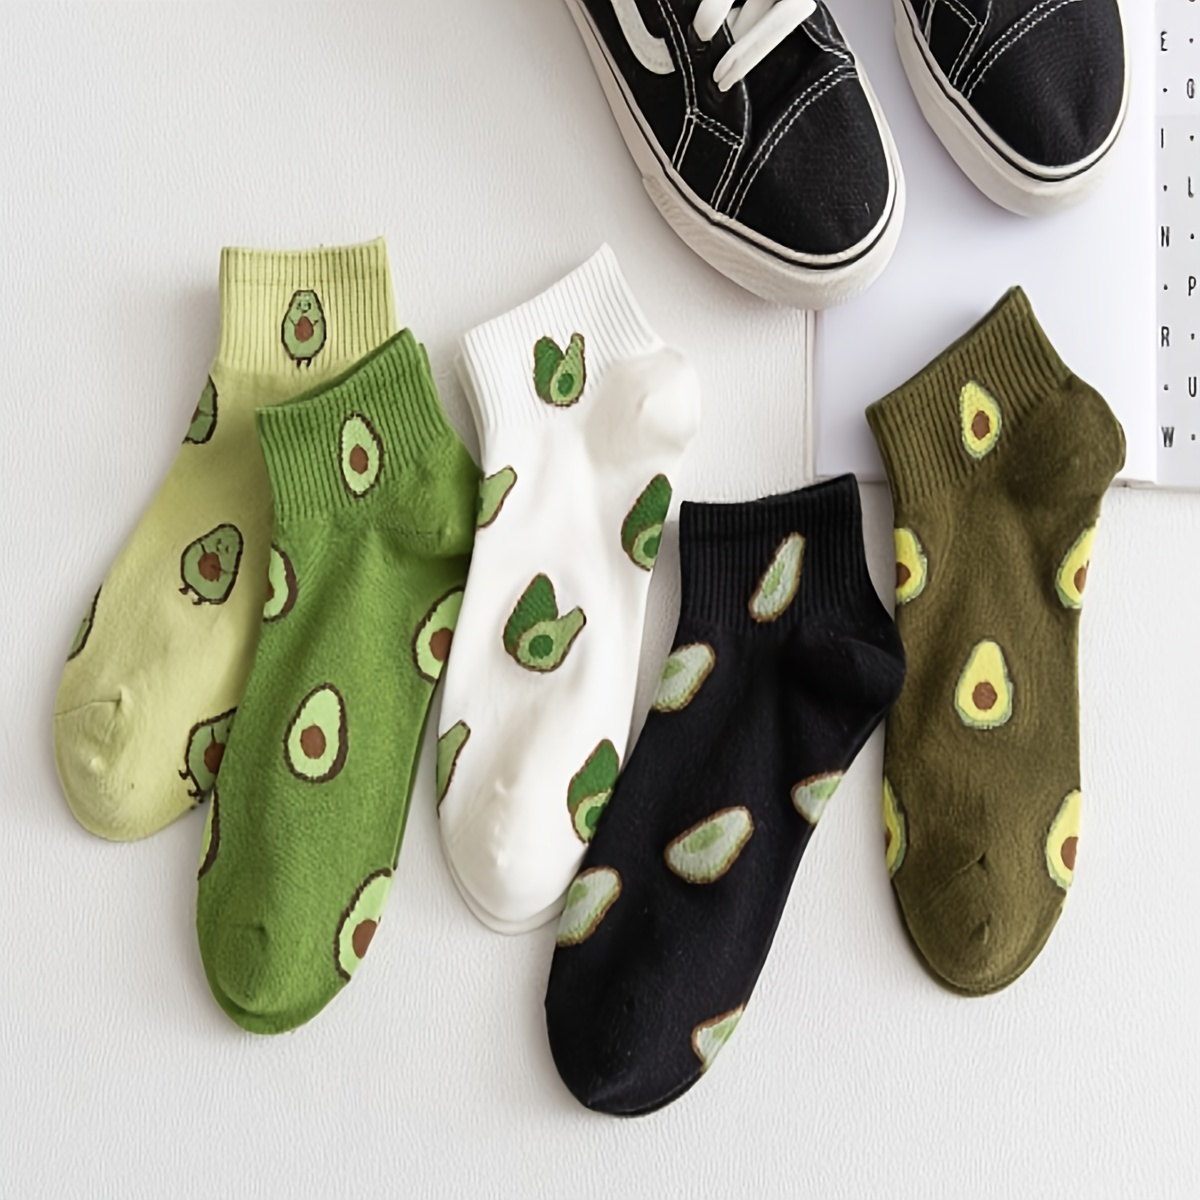 

5 Pairs Of Avocado Cute Lovely Ankle Cotton Women Daily Casual Summer Breathable Fruit Green Socks